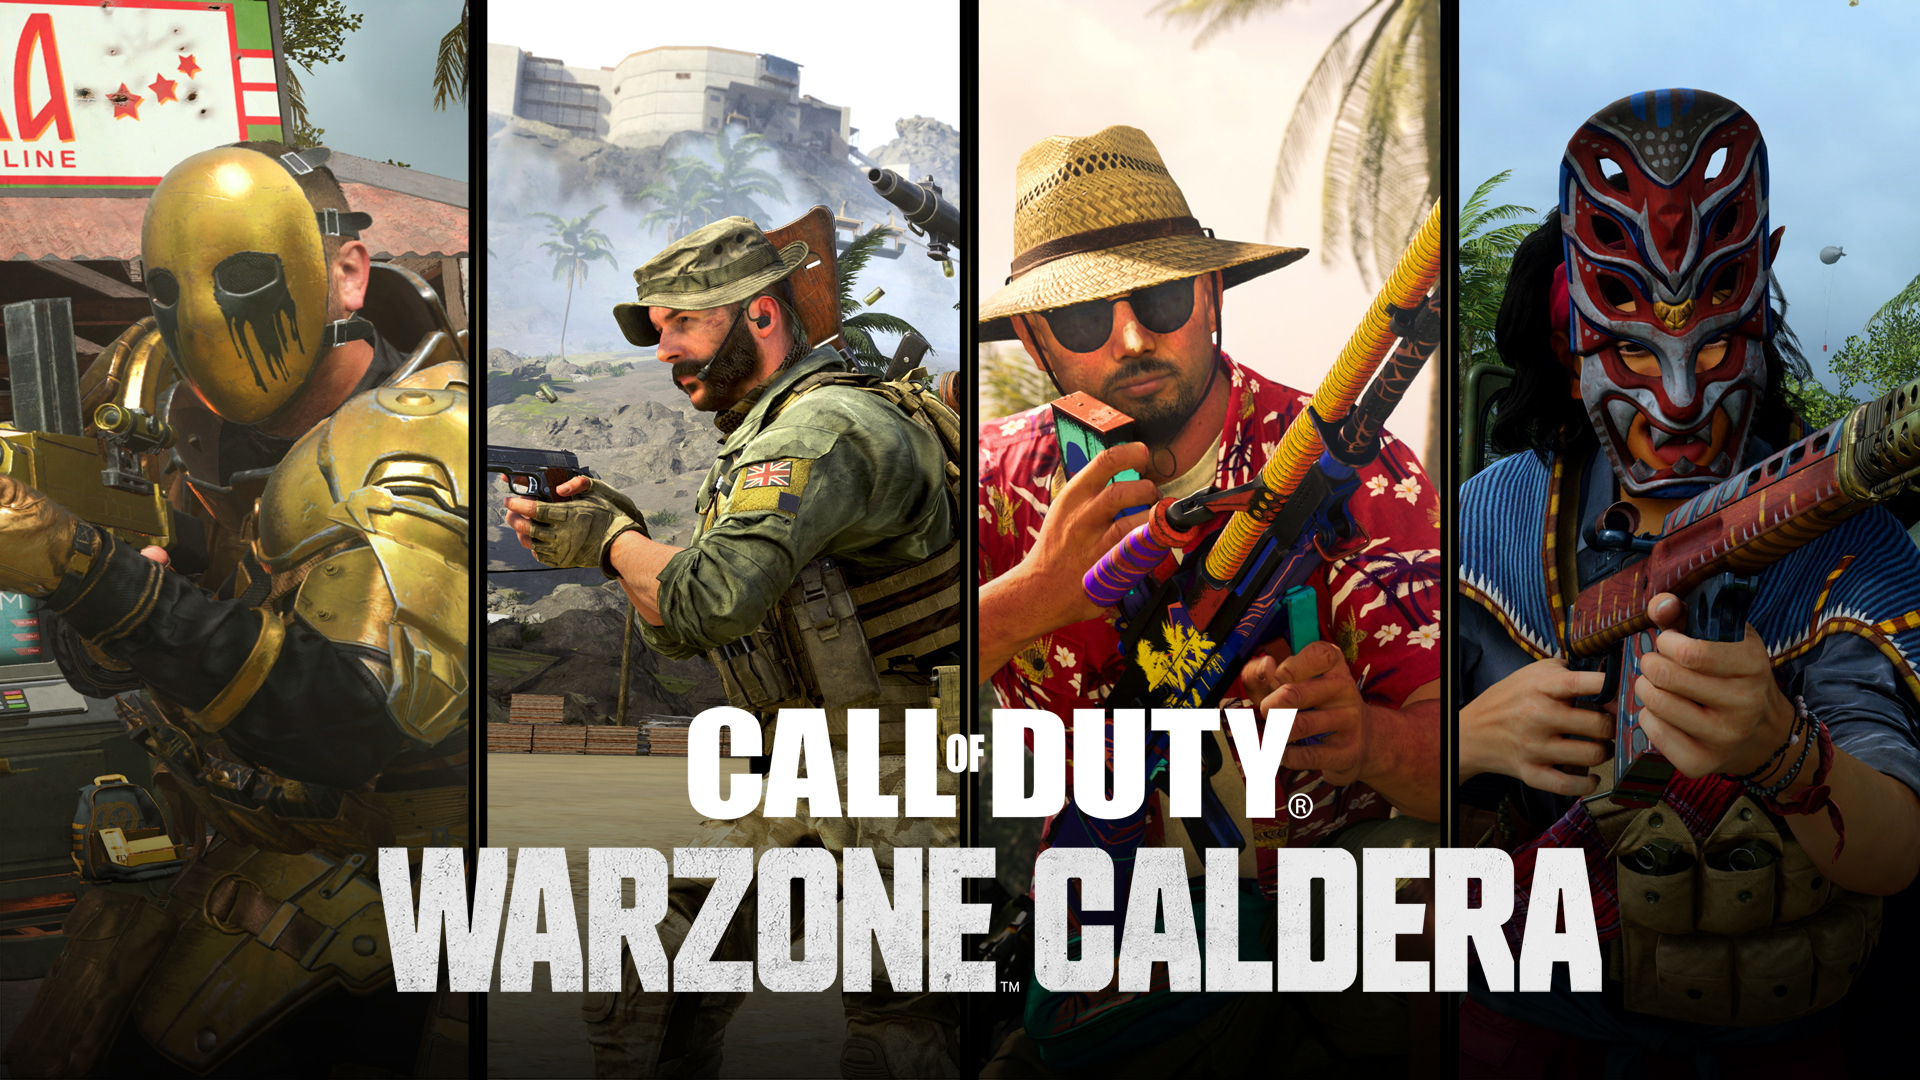 Is Warzone Caldera worth playing after the launch of Warzone 2?